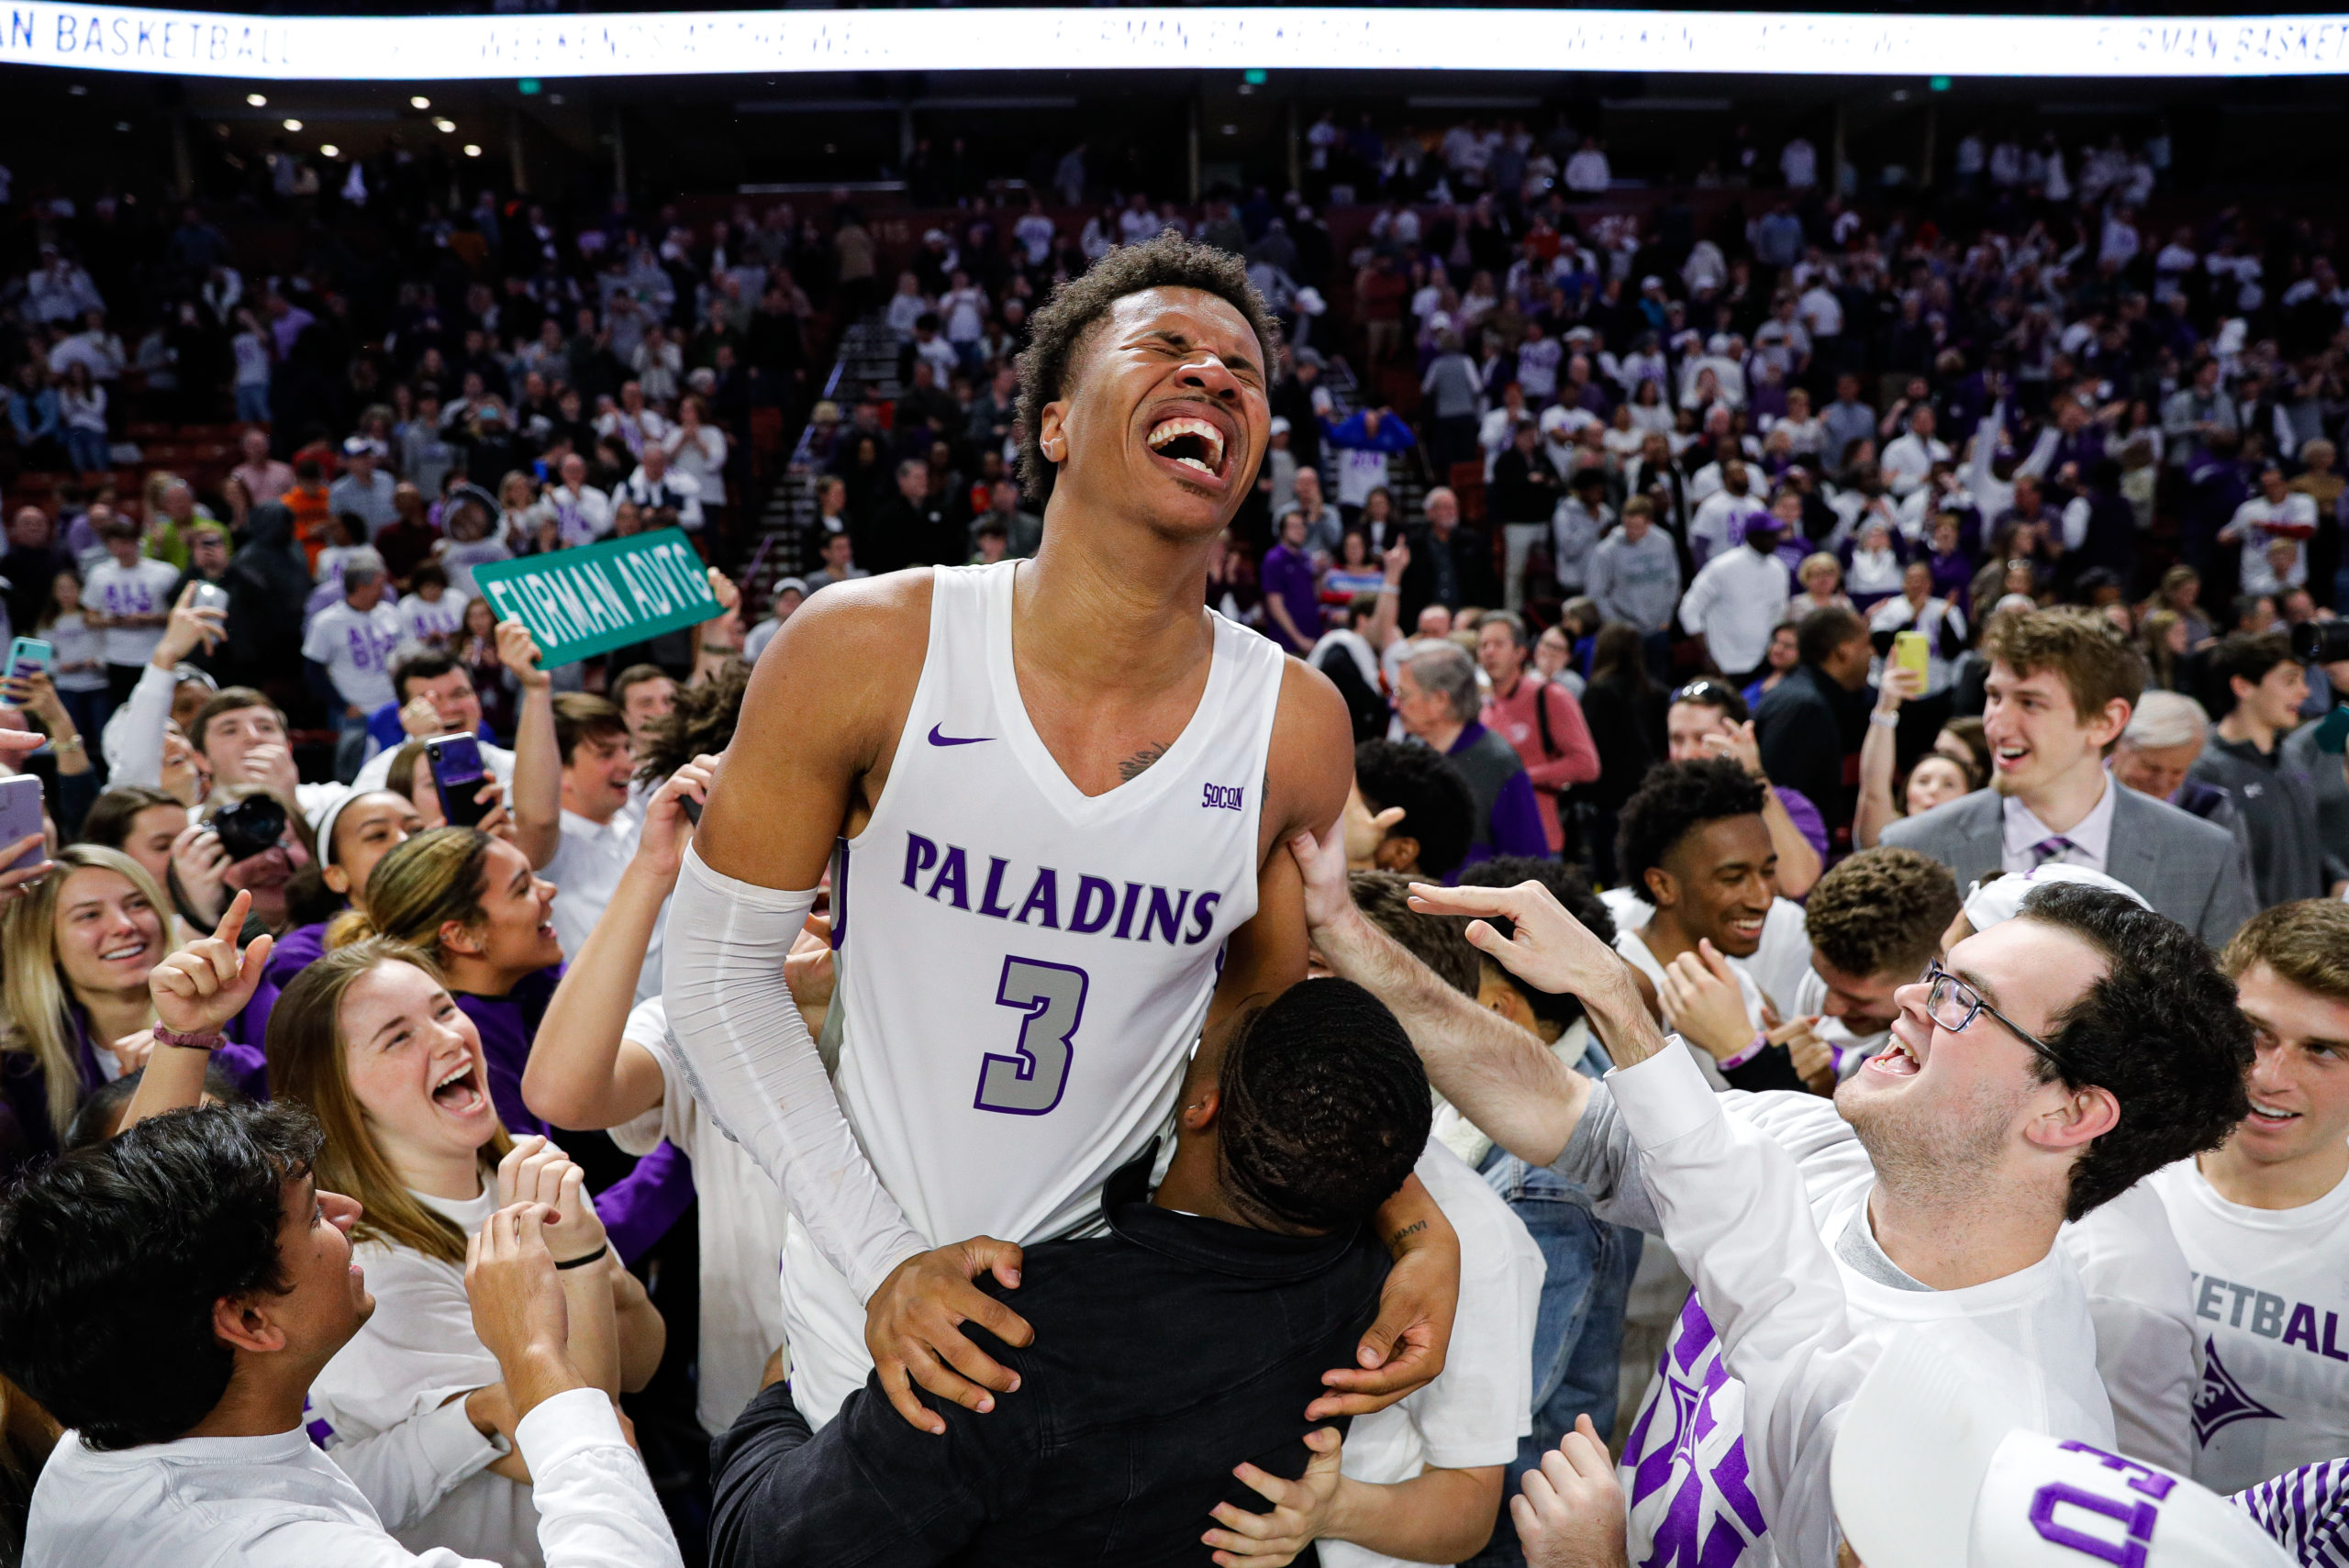 Furman alum and philanthropist Ravenel B. Curry III has pledged $10 million to Furman University for renovations to Timmons Arena, home to the Paladins’ men’s and women’s basketball programs.